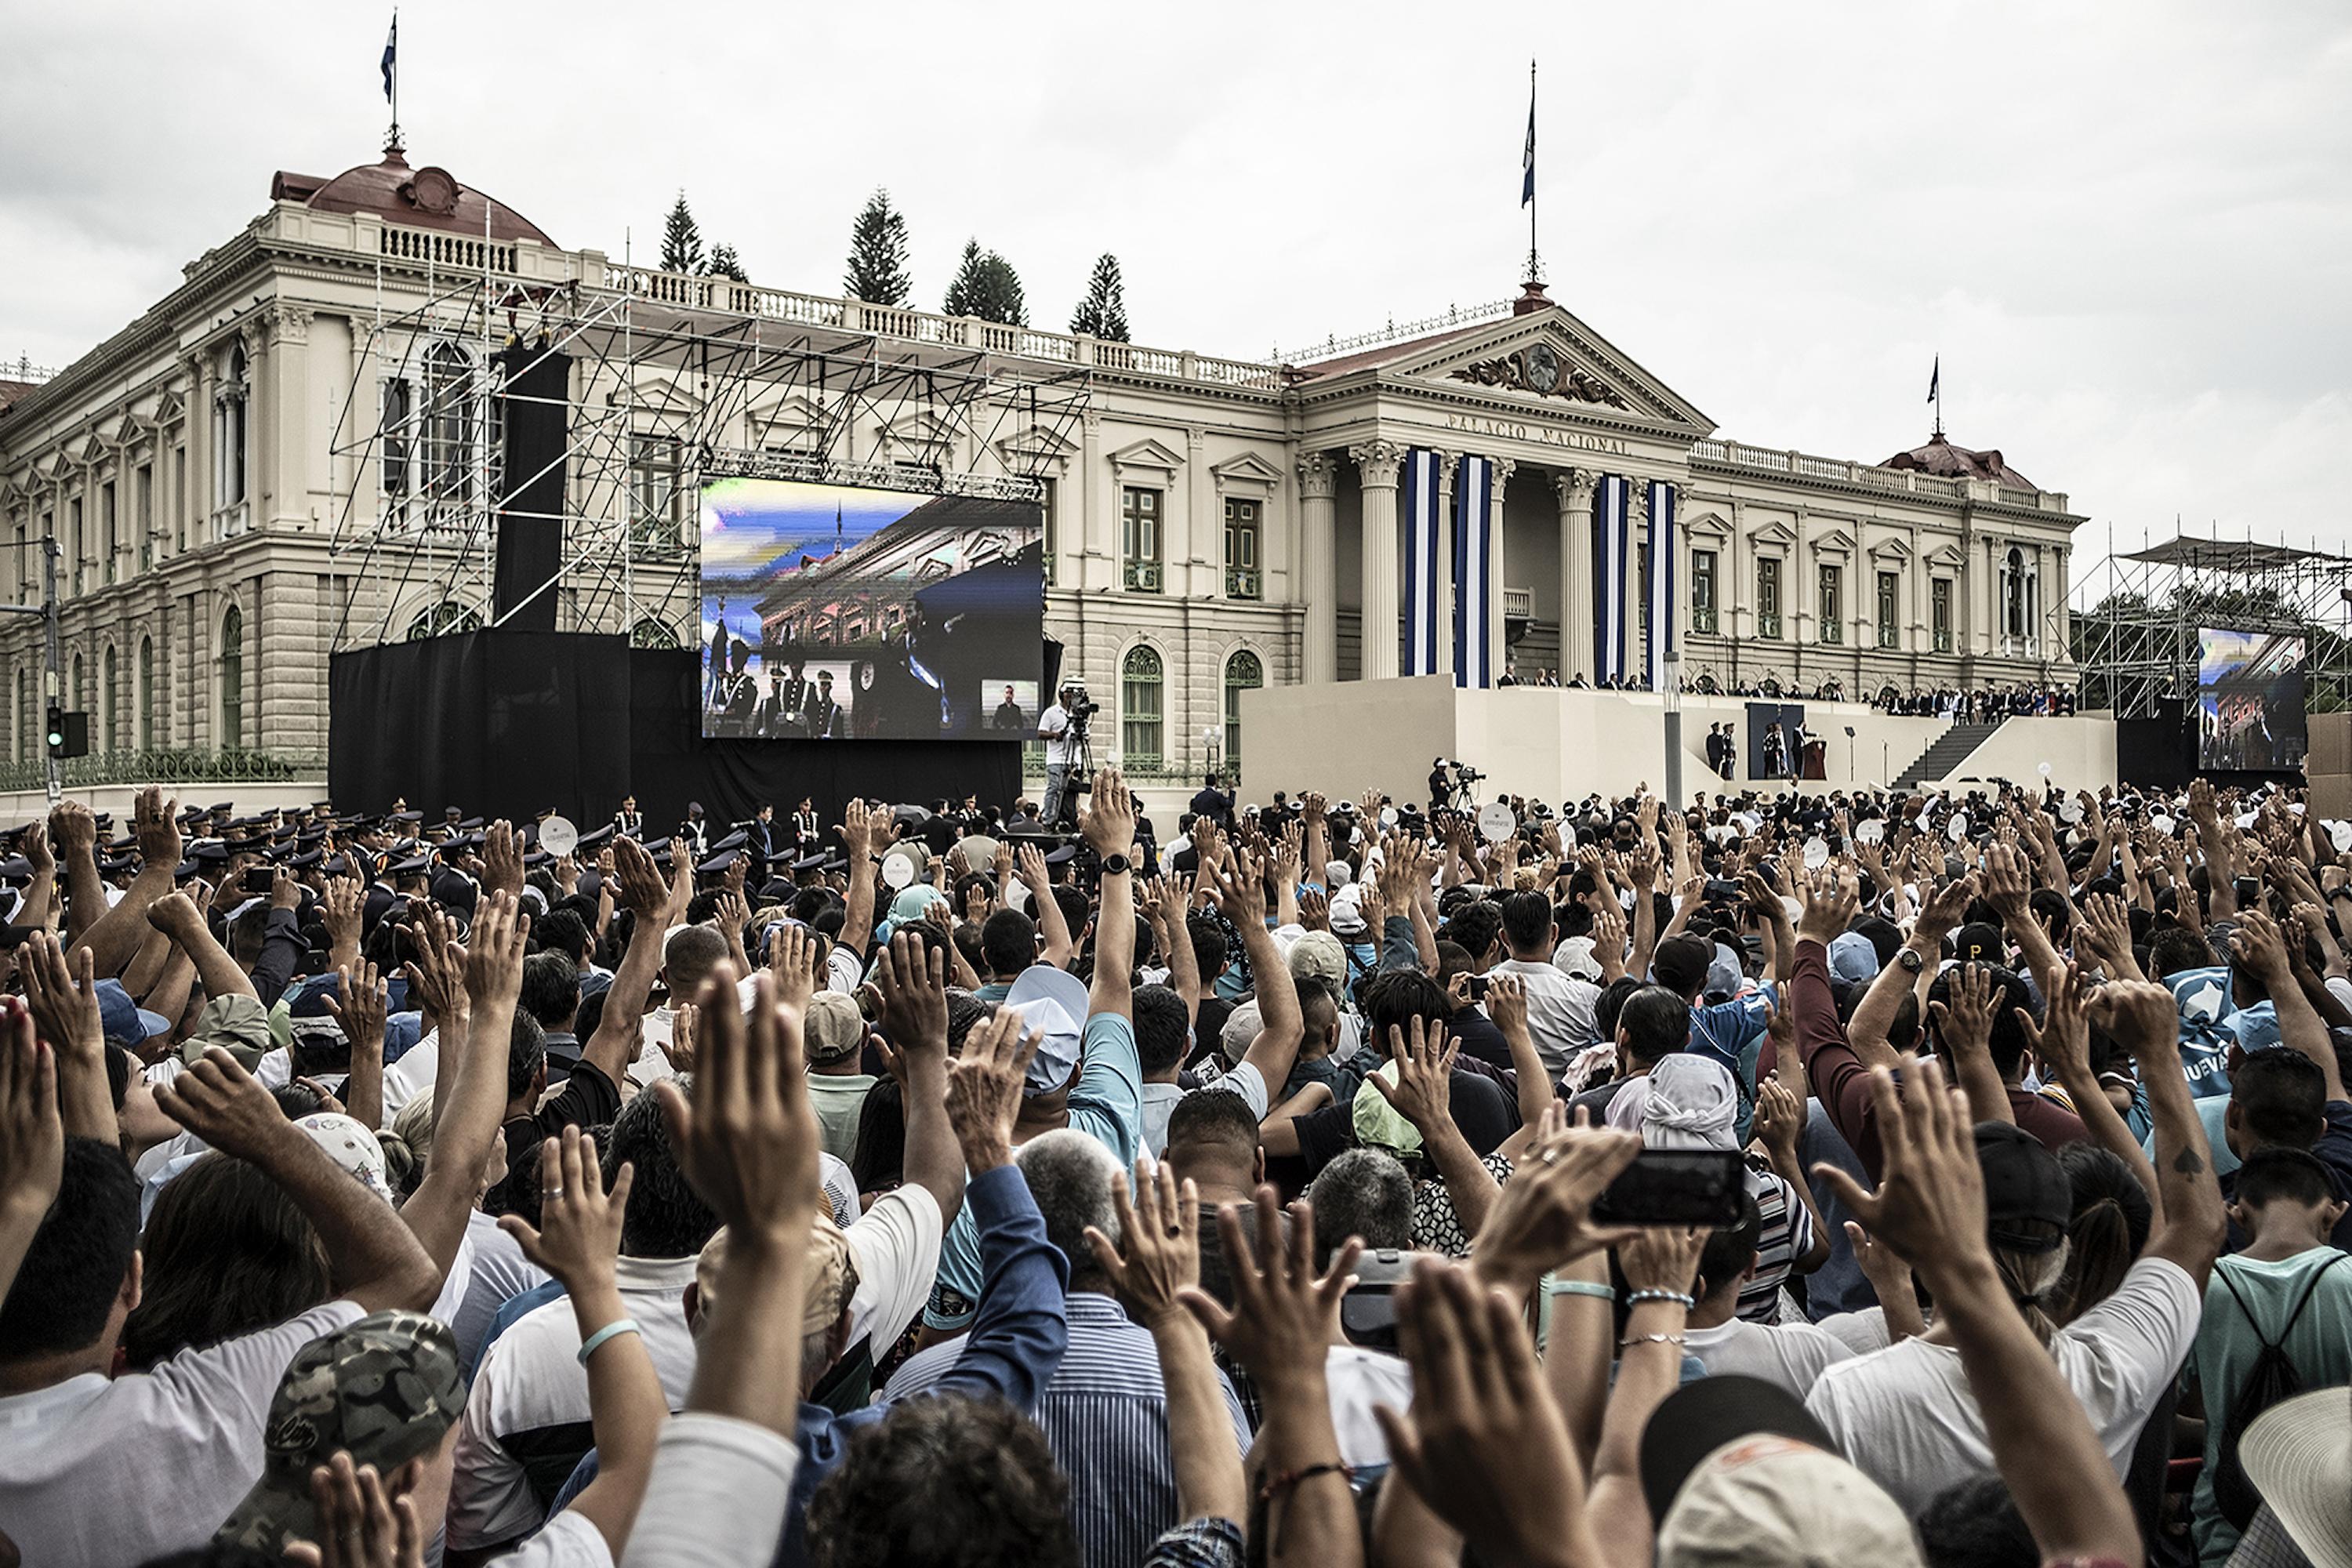 At the end of his inauguration speech, Nayib Bukele asked the crowd to take an oath with him: 